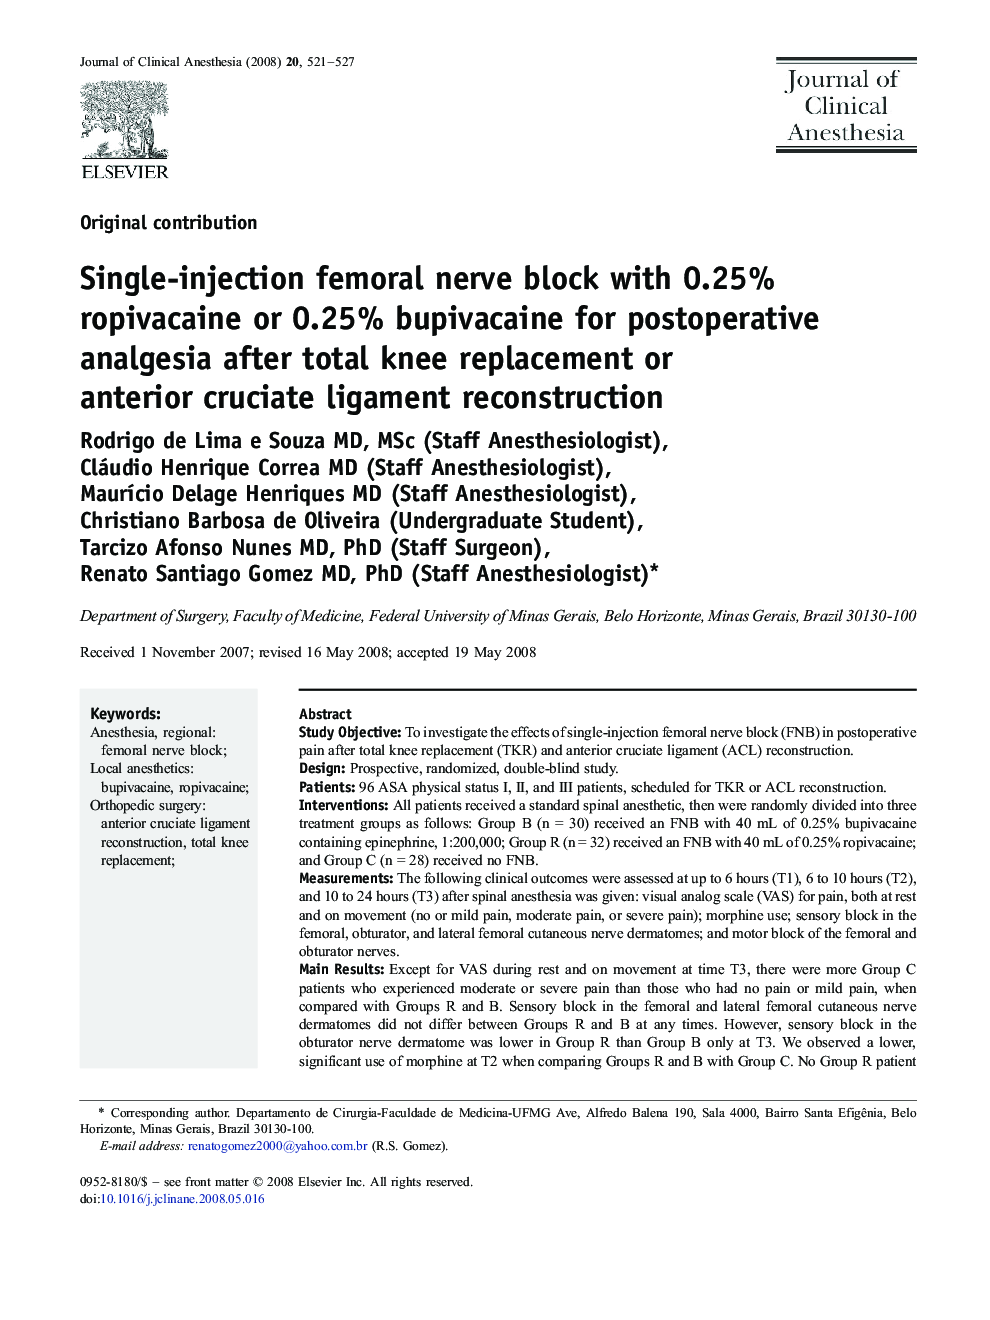 Single-injection femoral nerve block with 0.25% ropivacaine or 0.25% bupivacaine for postoperative analgesia after total knee replacement or anterior cruciate ligament reconstruction